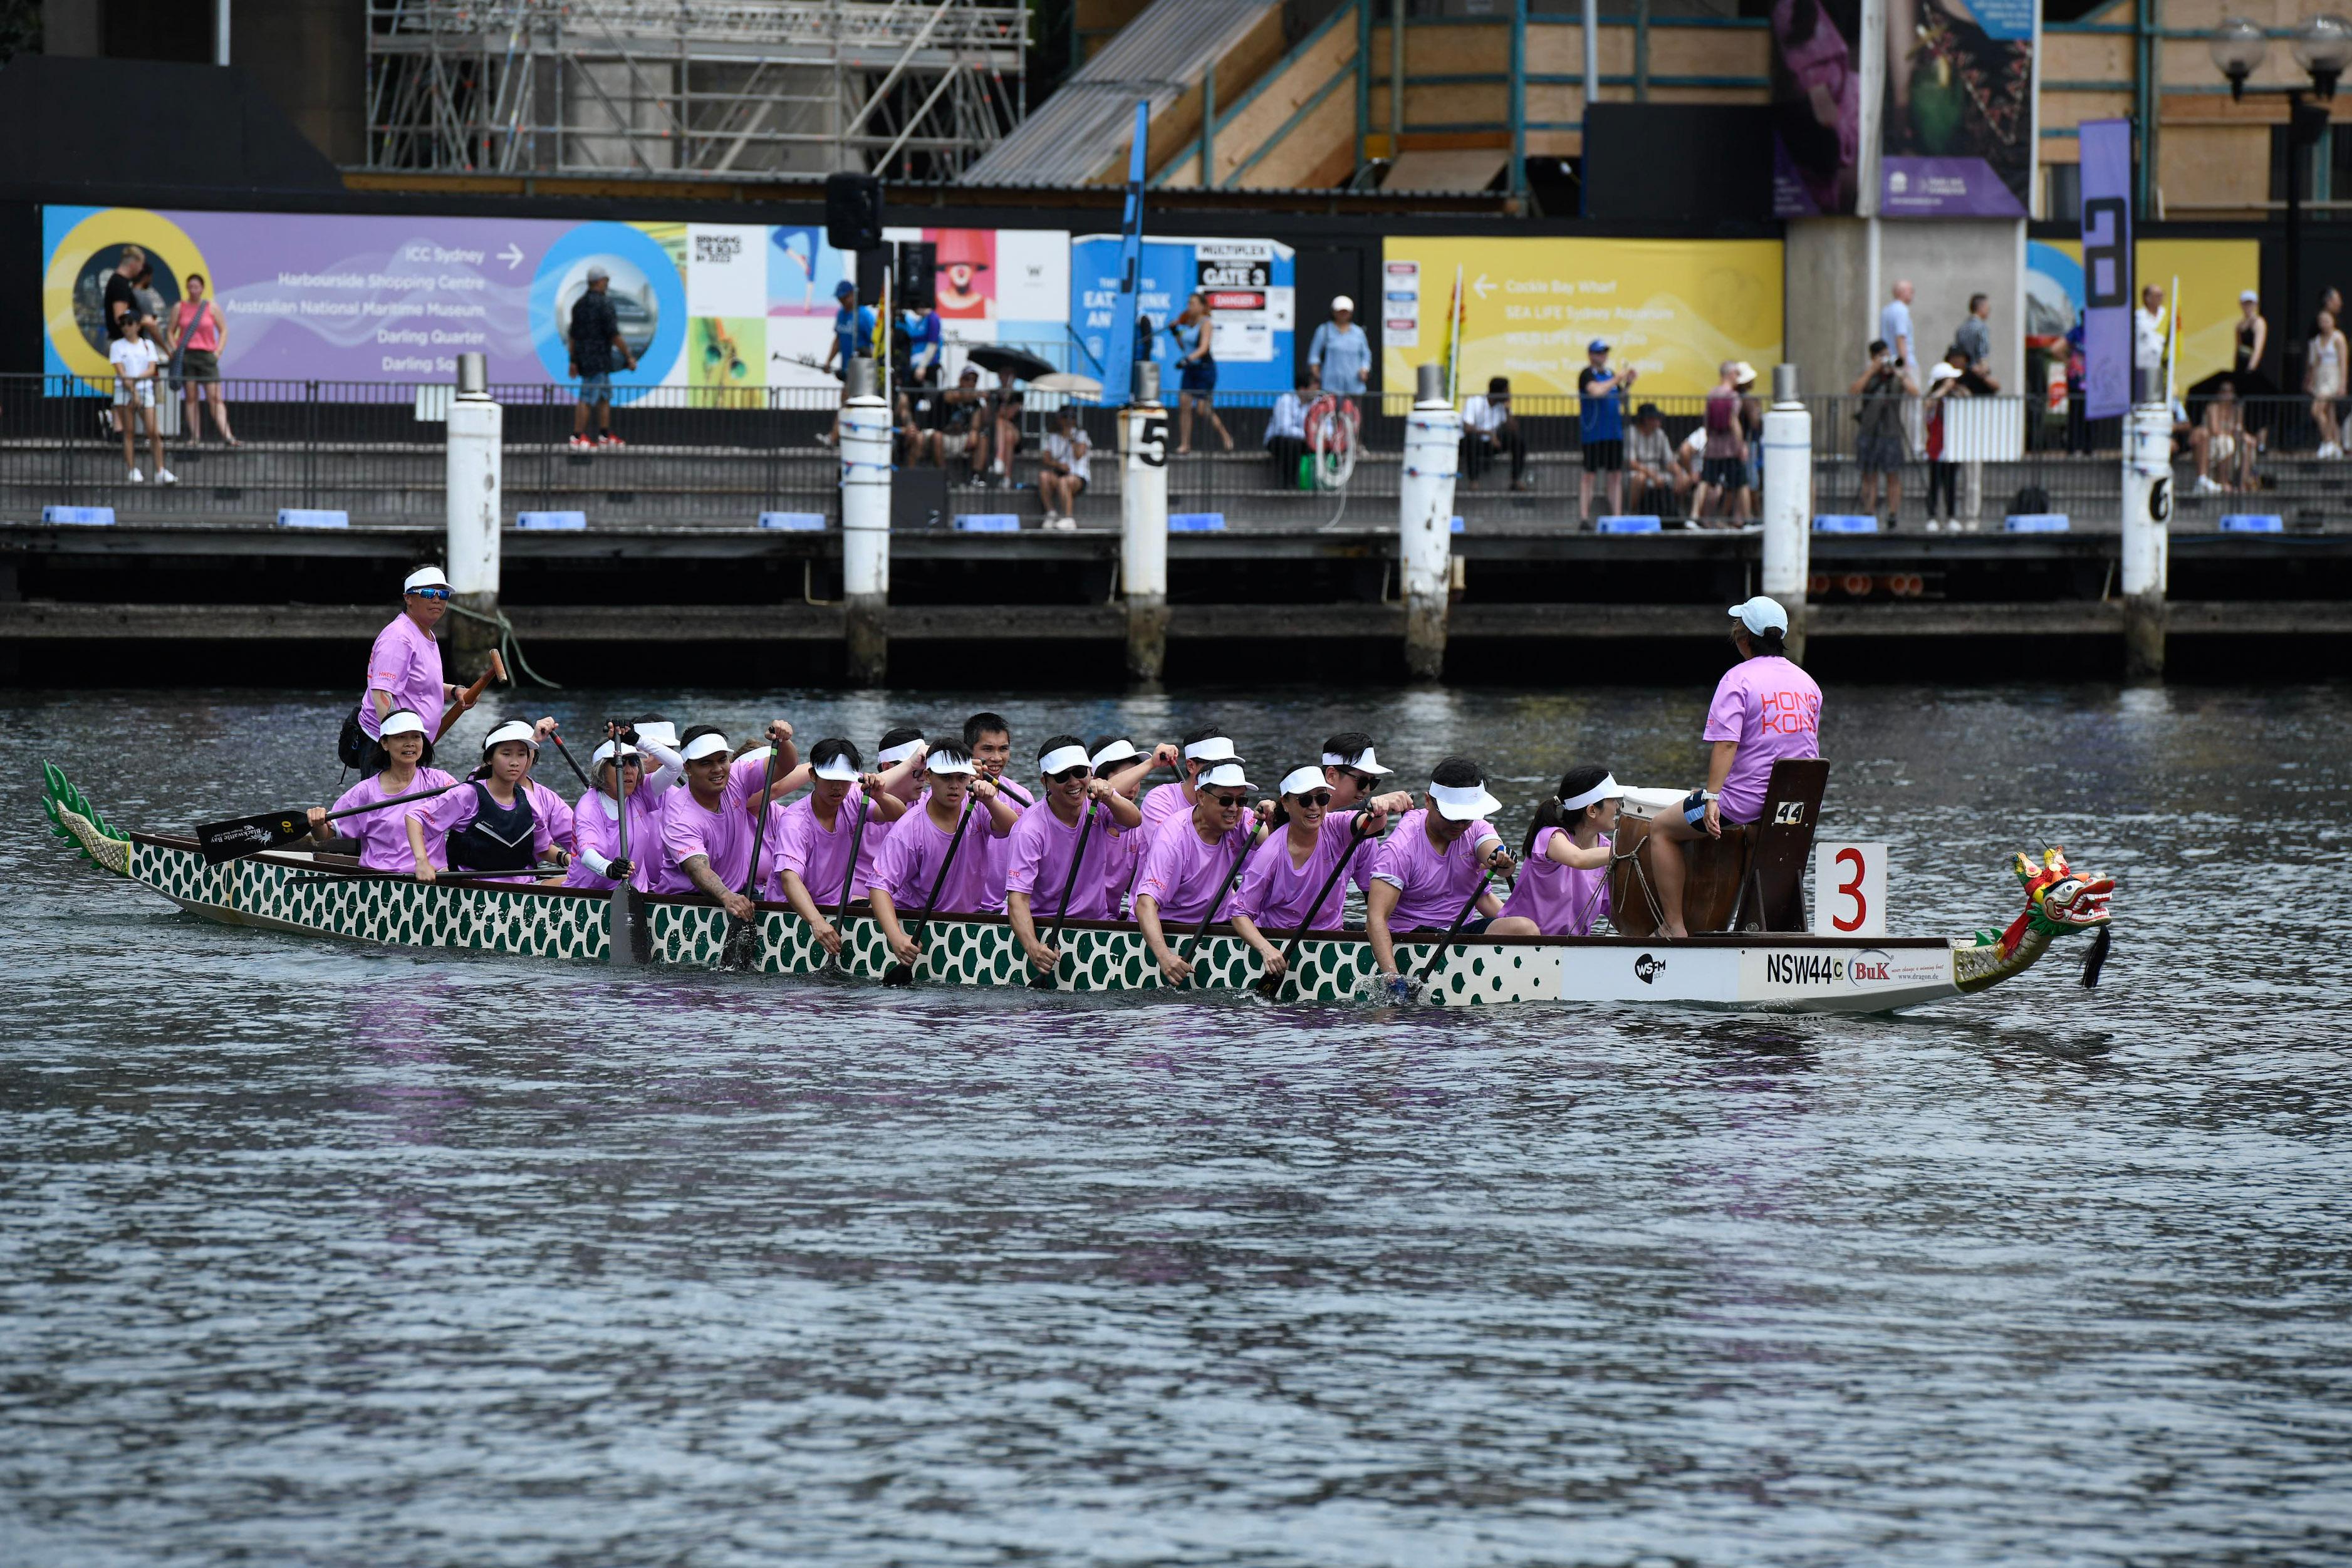 The Hong Kong Economic and Trade Office, Sydney (Sydney ETO) participated in the Sydney Lunar Festival Dragon Boat Races held in Sydney, Australia, on January 28 and 29. The Hong Kong Team organised by the Sydney ETO competed in the Social Category held in Darling Harbour on January 29.

